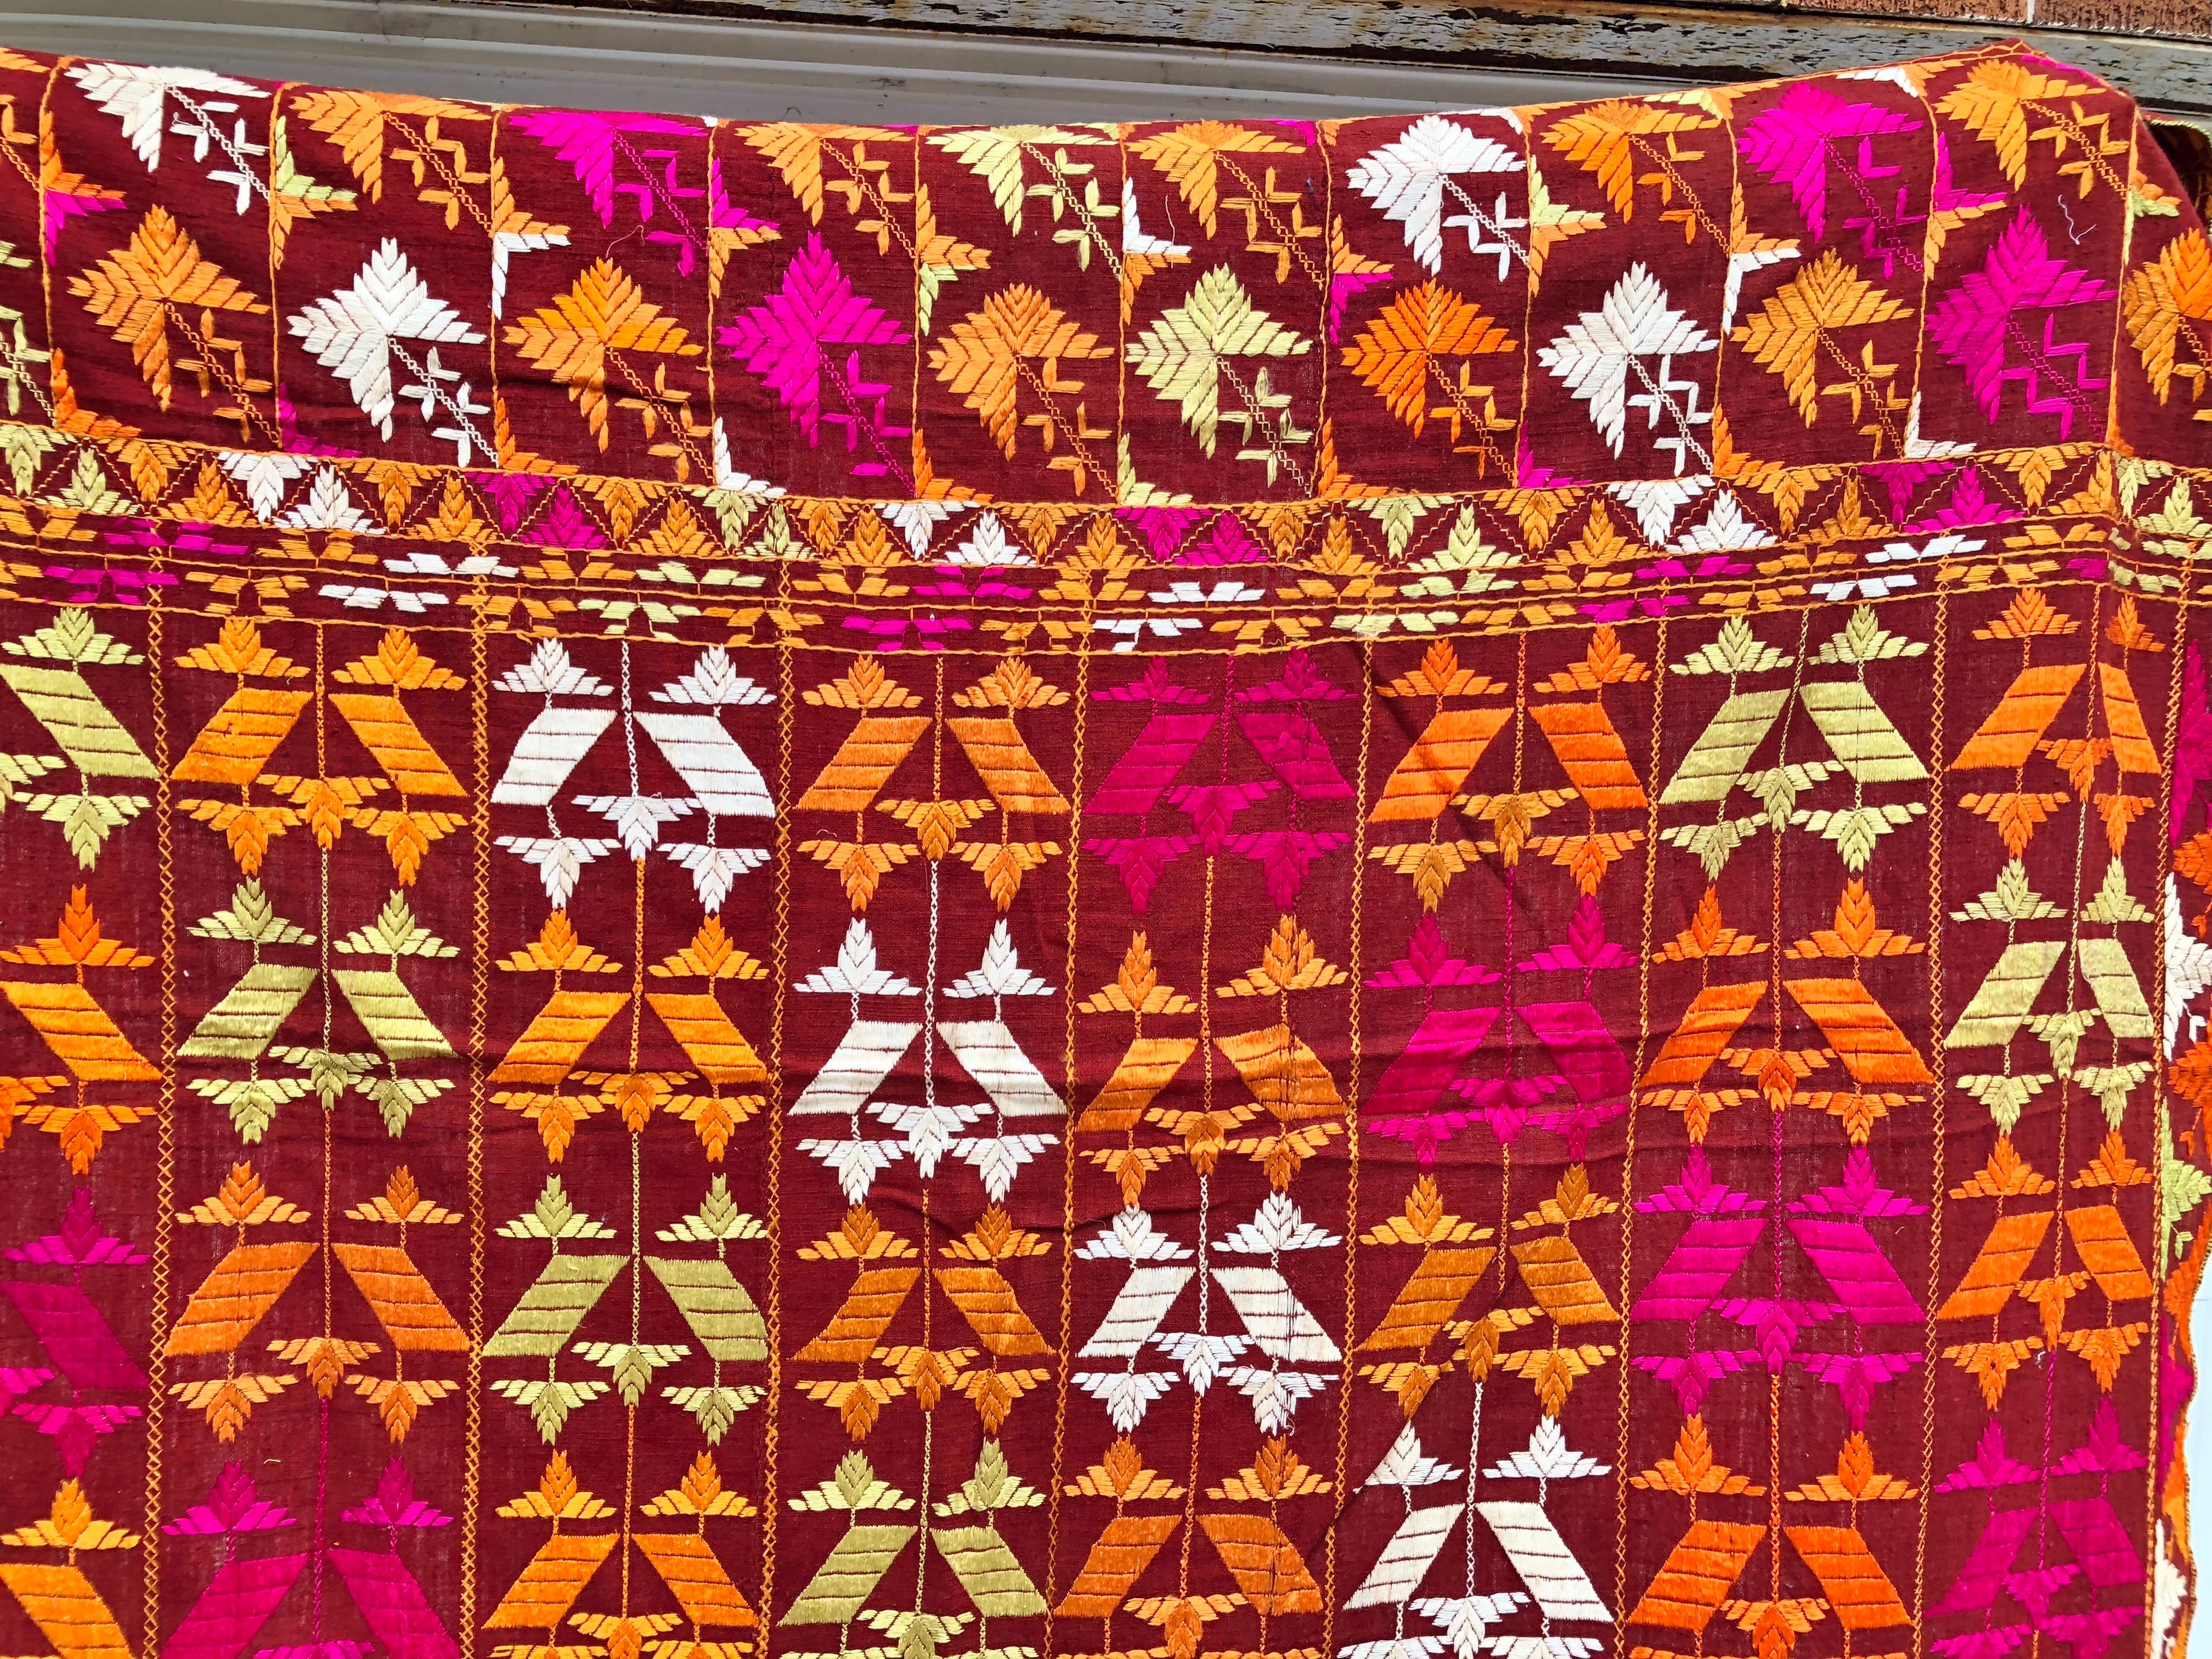 Vintage silk embroidered Phulkari wedding shawl from Punjab, India. The shawl is handwoven cotton khadi cloth that is hand embroidered with vibrant silk threads. Made by relatives of the your girl for her wedding and other special occasions. The